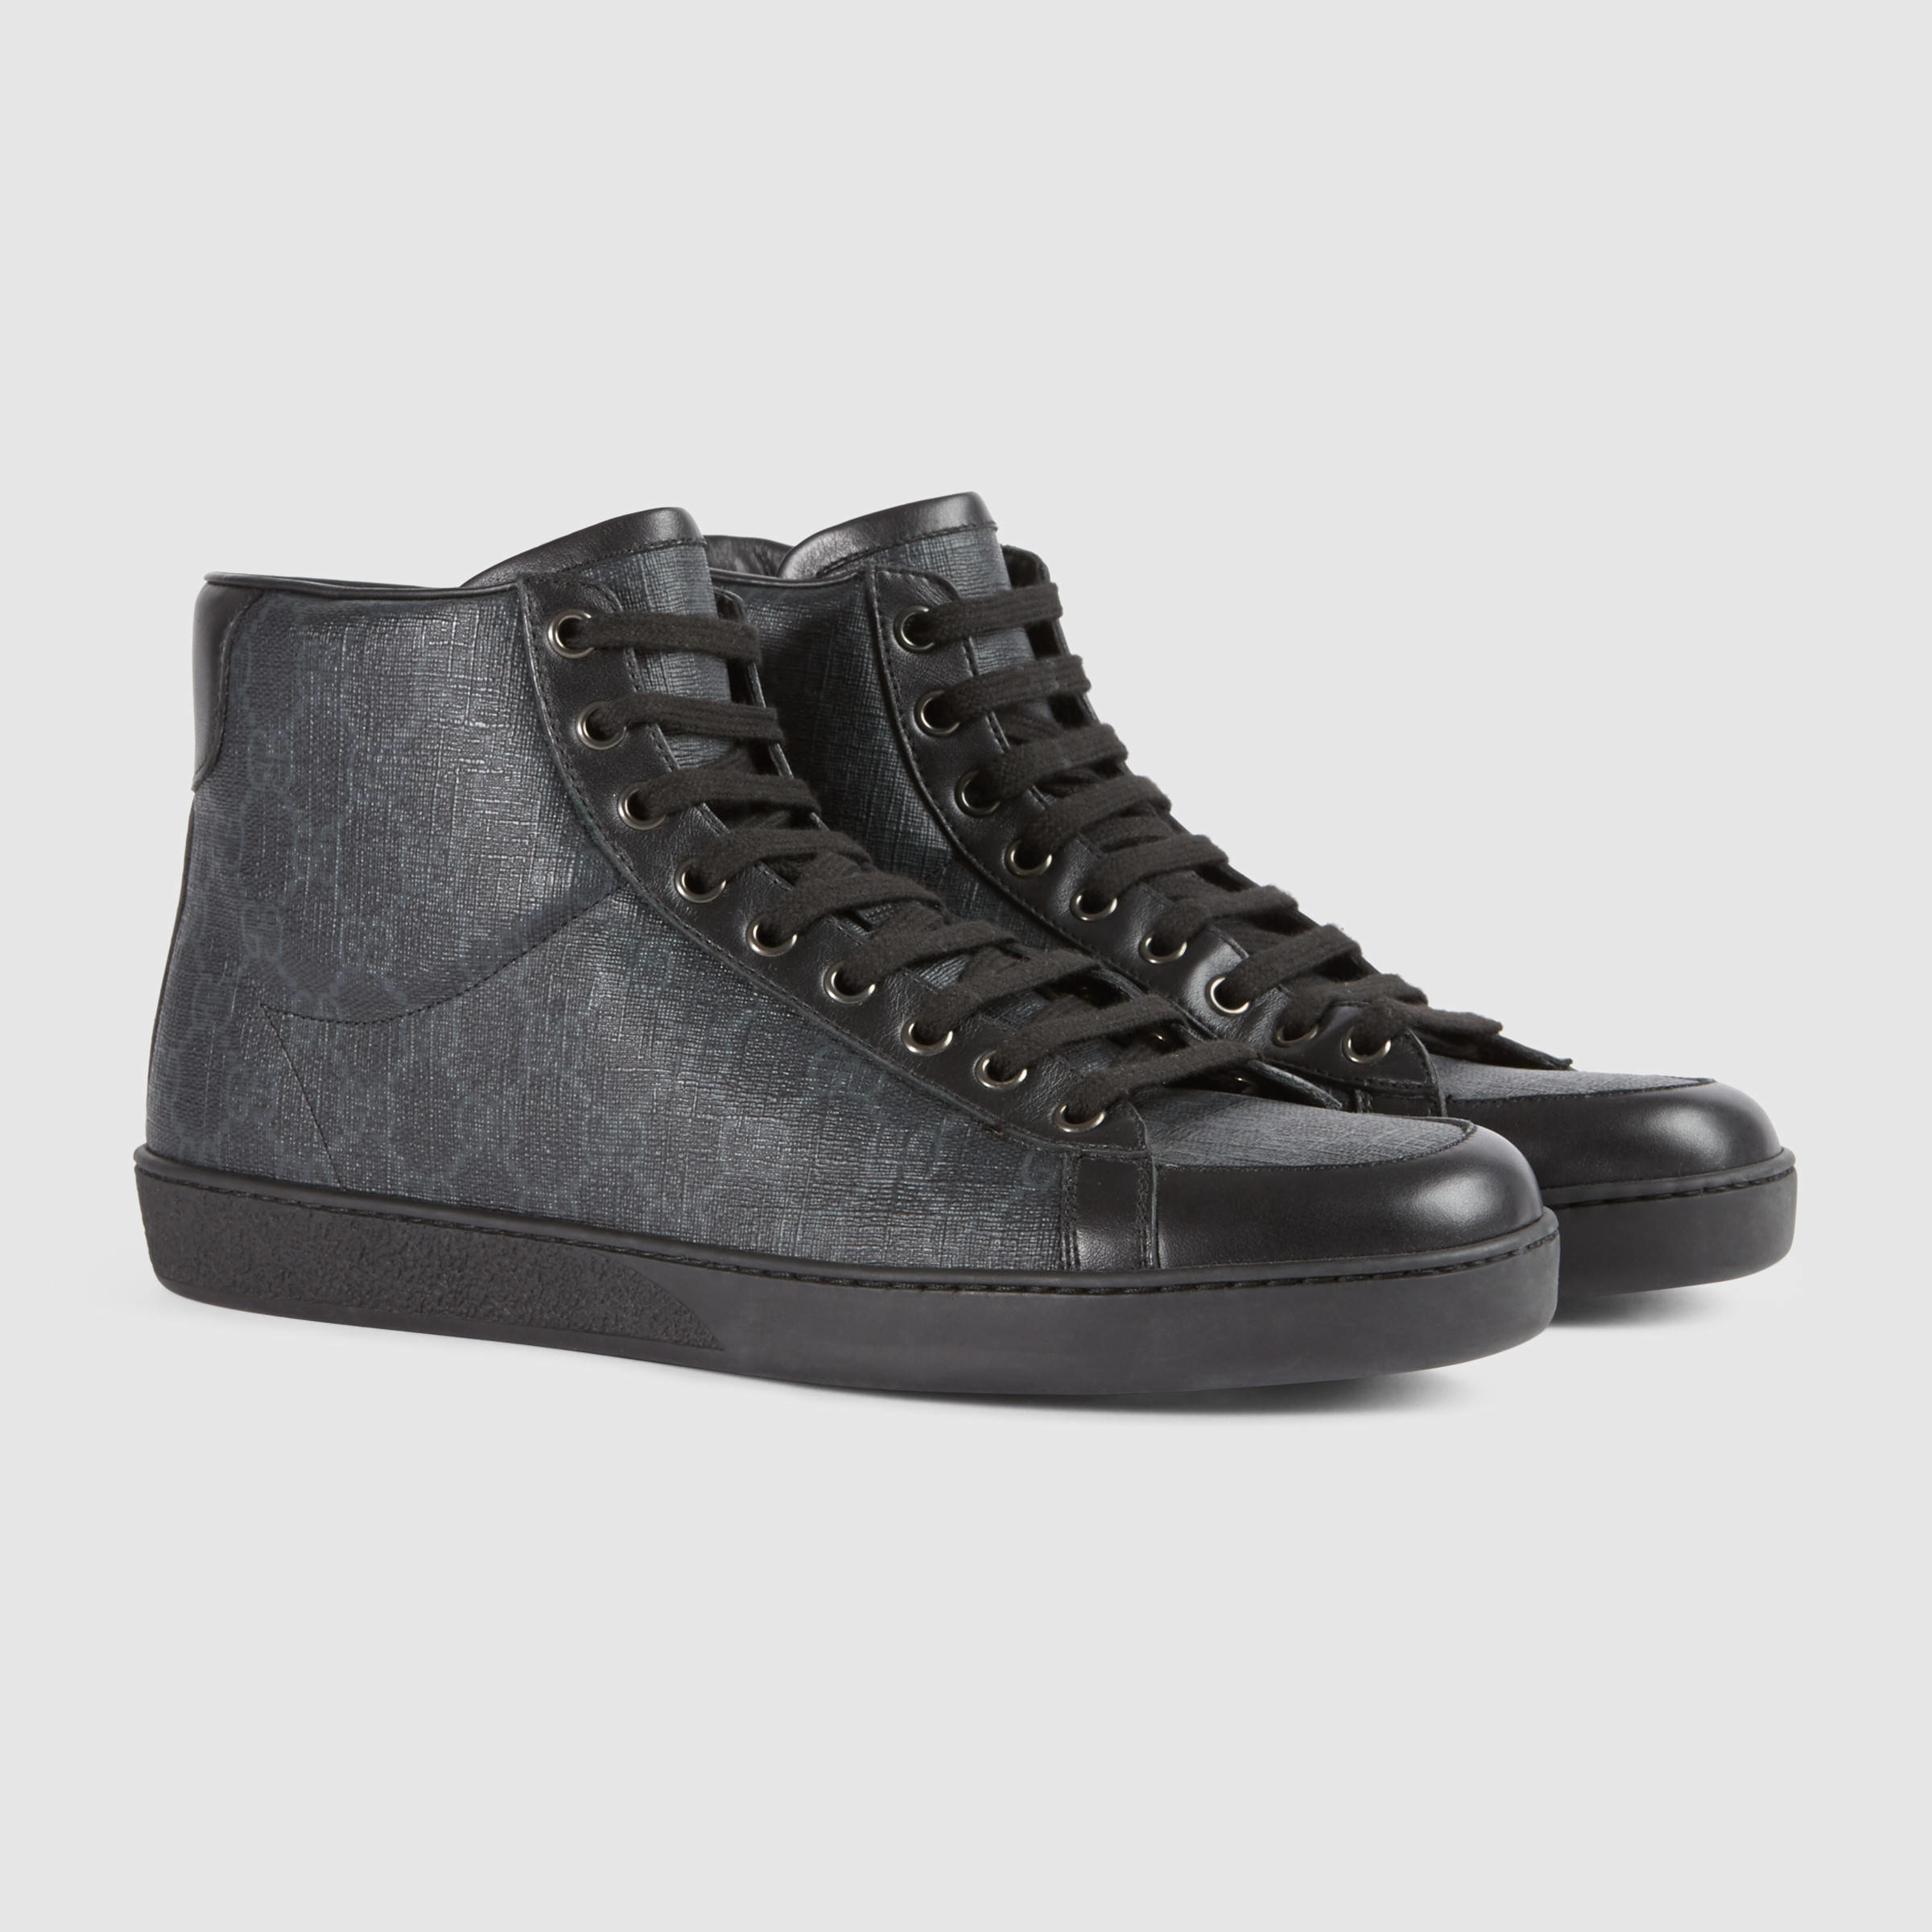 Gucci Canvas Gg Supreme High-top Sneaker in Gray for Men - Lyst